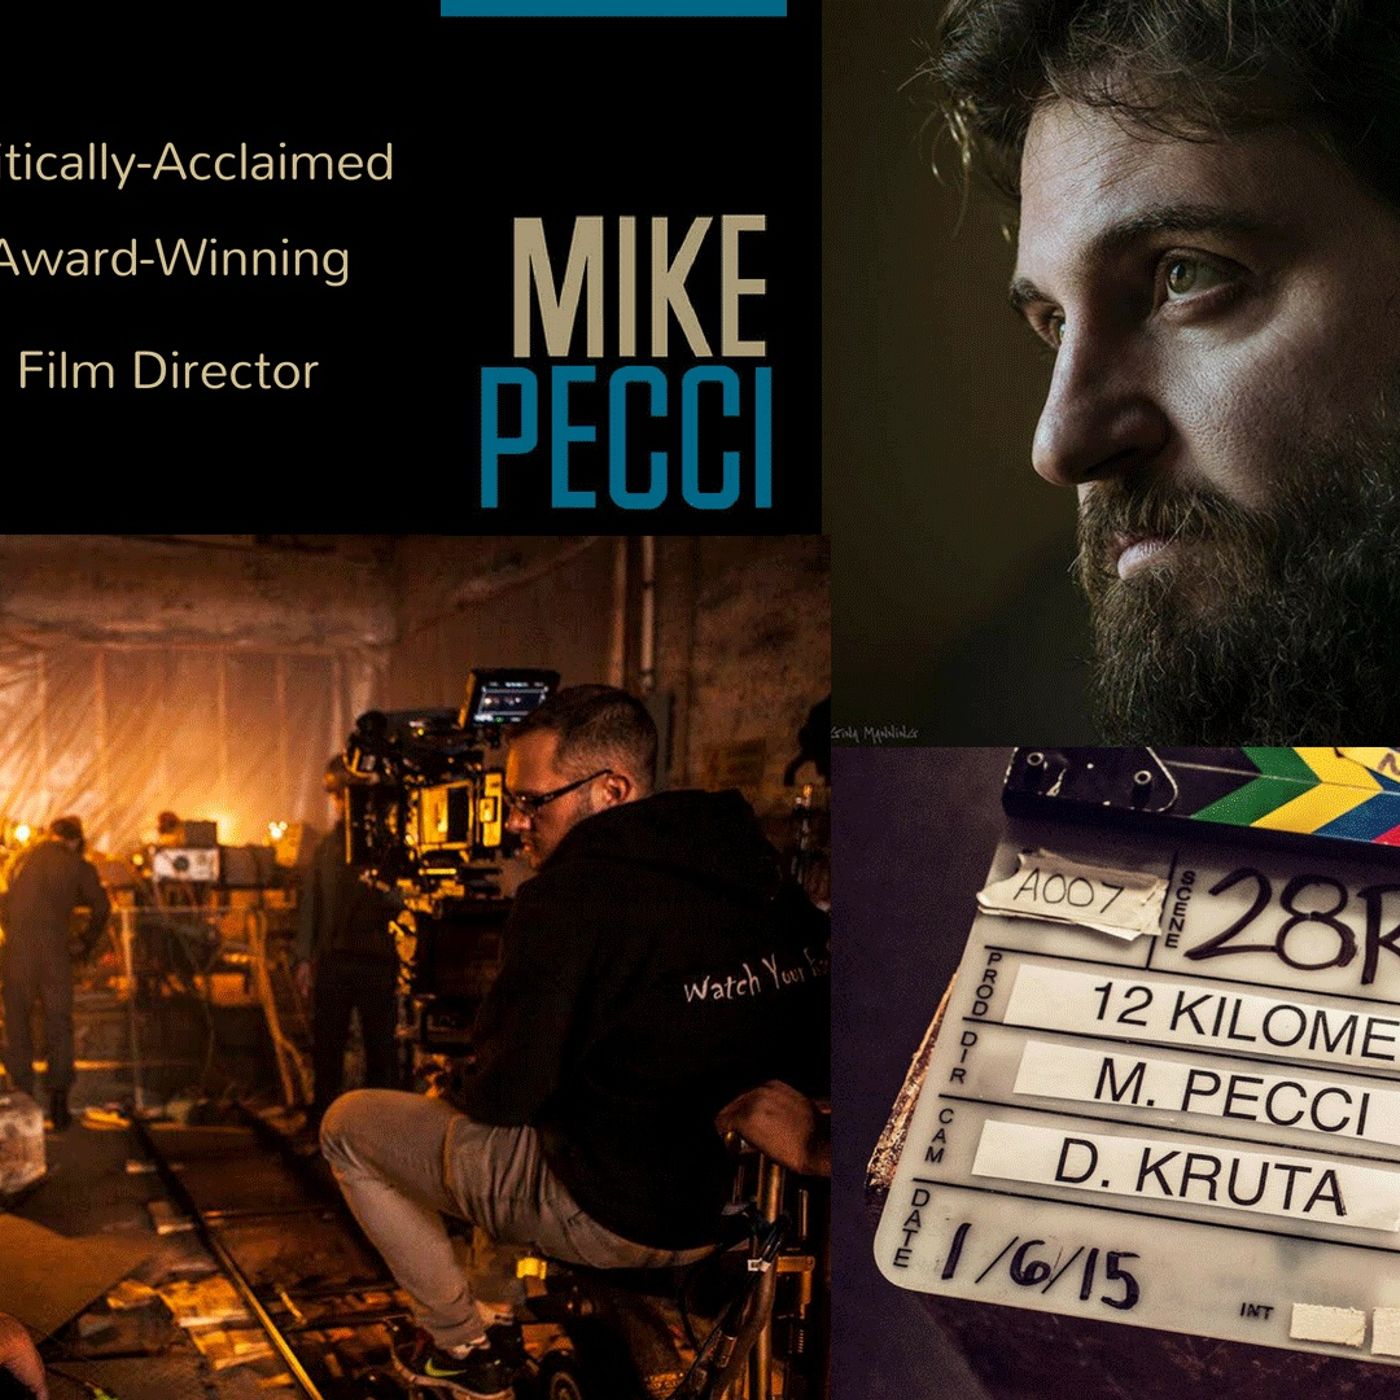 Episode 36 - Annie Talks with Mike Pecci | Critically Acclaimed, Award-winning Film Director | The A